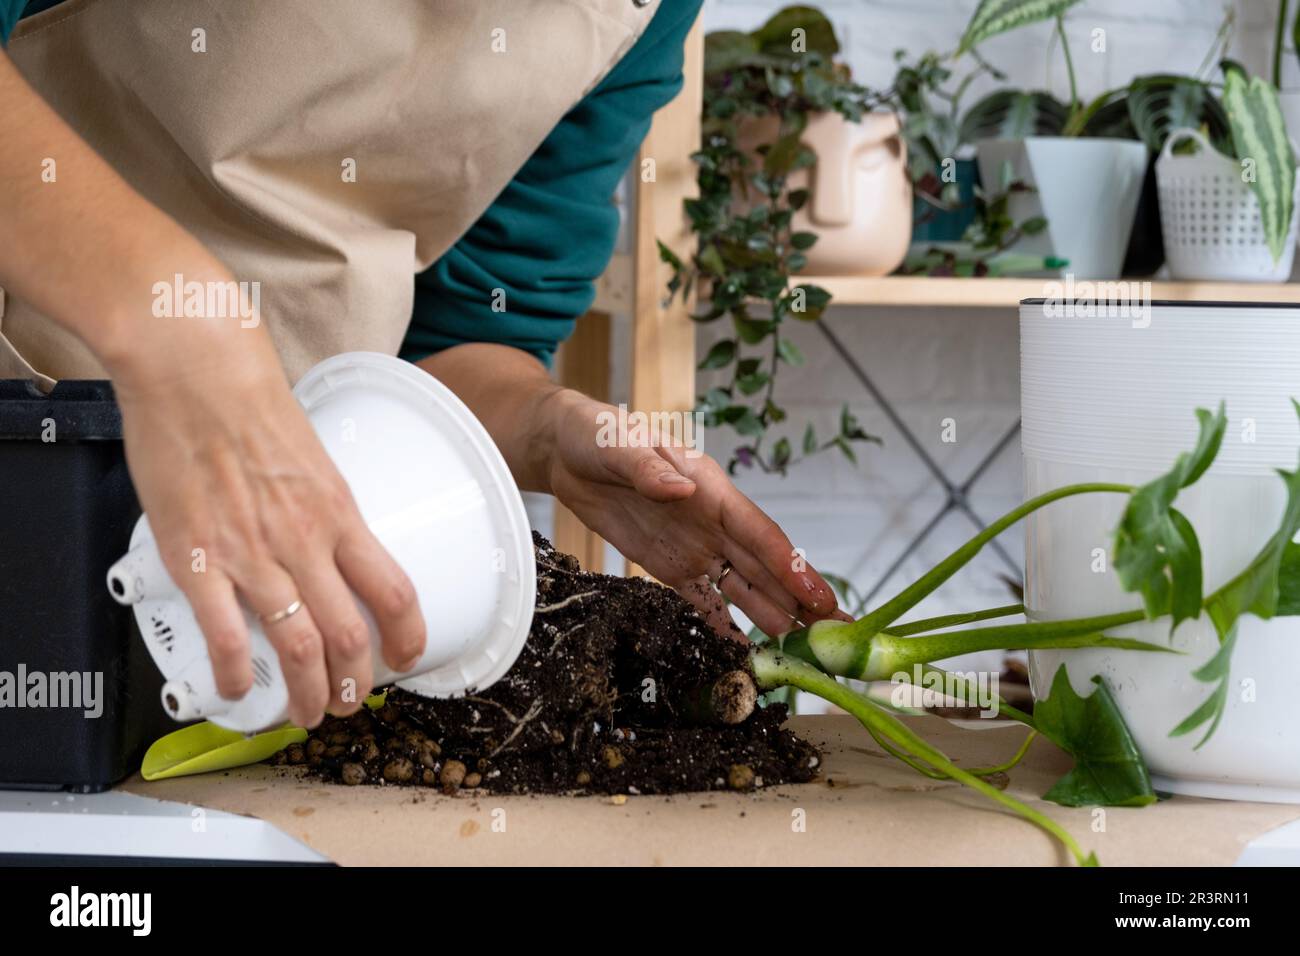 Transplanting a home plant Philodendron into a new pot. A woman plants a stalk with roots in a new soil. Caring and reproduction Stock Photo